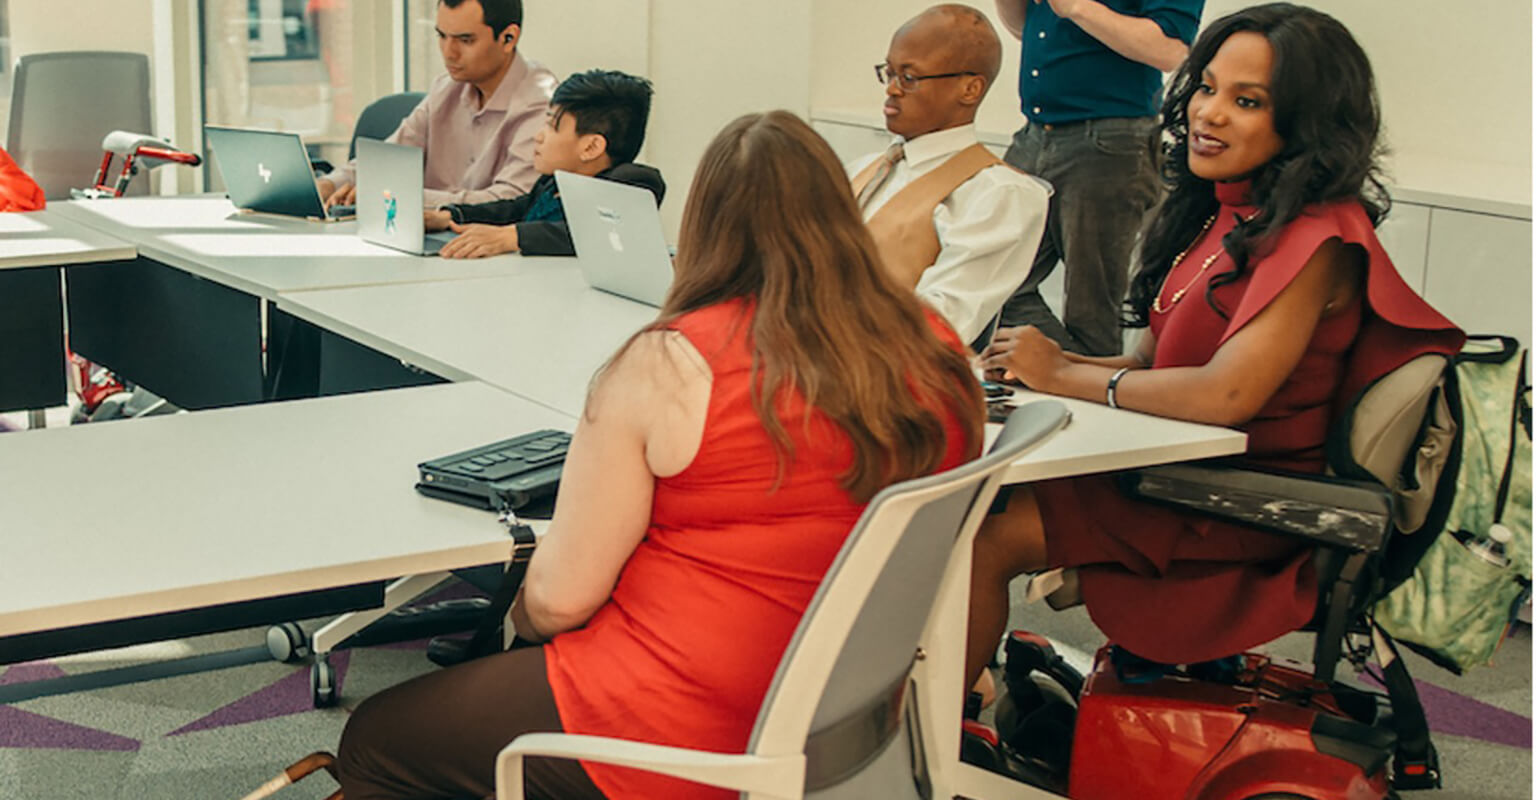 An image of people meeting in a conference room. The tables in the room are set up in the shape of the letter U. The person in the center of the image is a white person, they have an accessible keyboard sitting on the table, and a black service dog lying at their feet. The person to their right is a black person using a motorized wheelchair, the two people seem to be speaking to one another. There are three other people in the background doing work on their laptops. There is one more person standing behind the group.